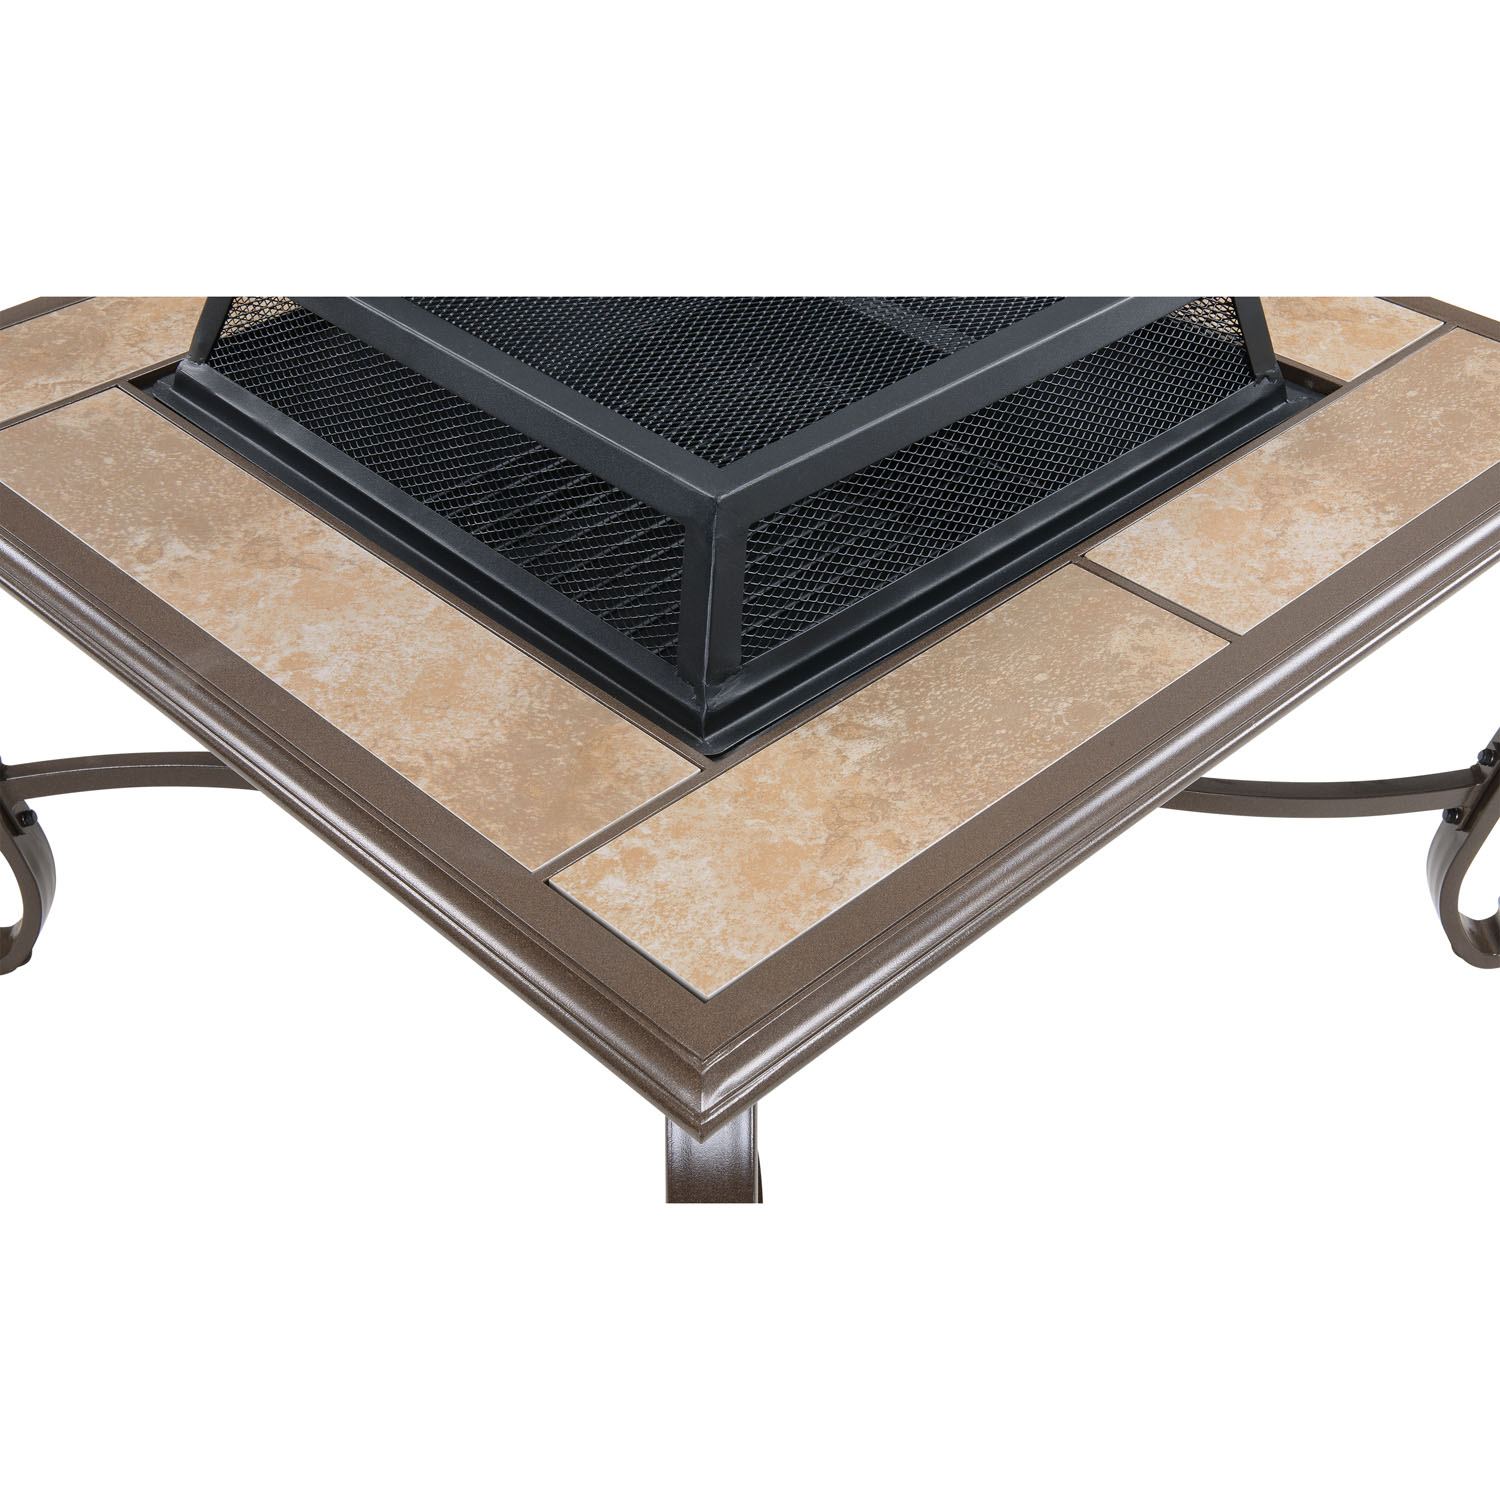 Hanover Ventura 4-Piece Conversation Set with Wood-Burning Fire Pit - image 3 of 9